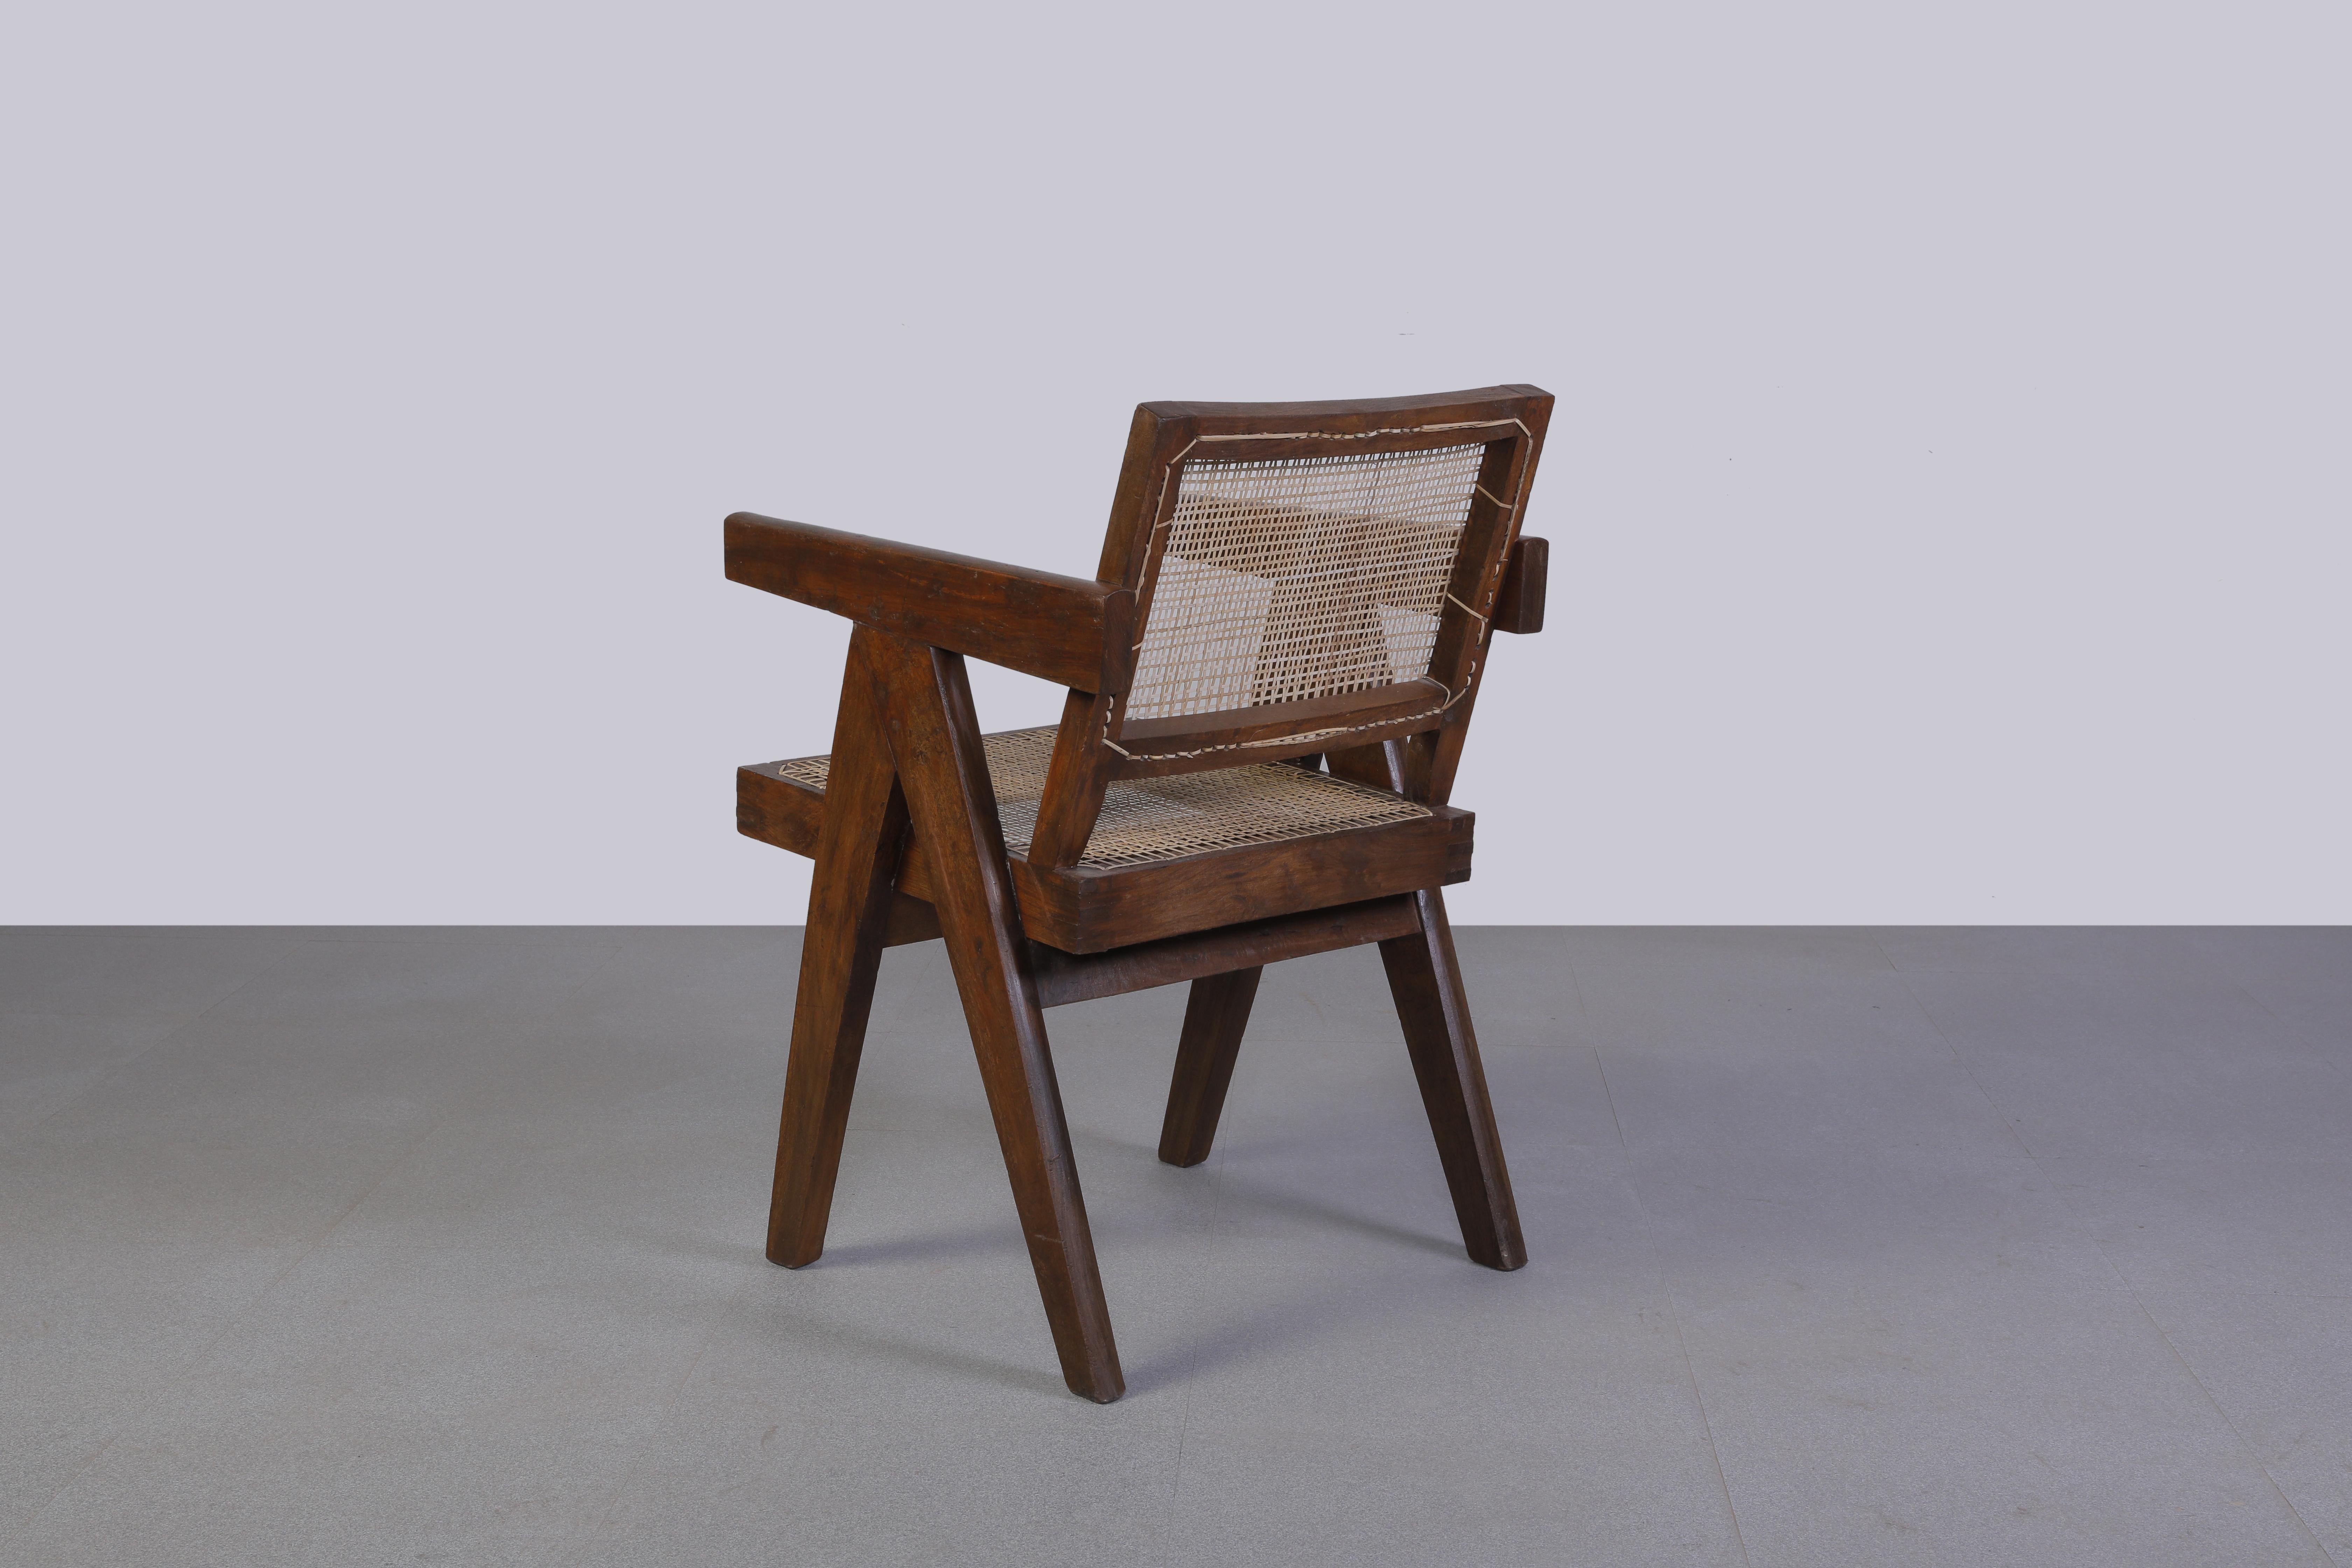 They have a patinated teak, which gives that chairs a strong character, showing all that traces of age and its uniqueness. They are finally historical pieces from an UNESCO World Heritage site, done by the most important architects from the 20th